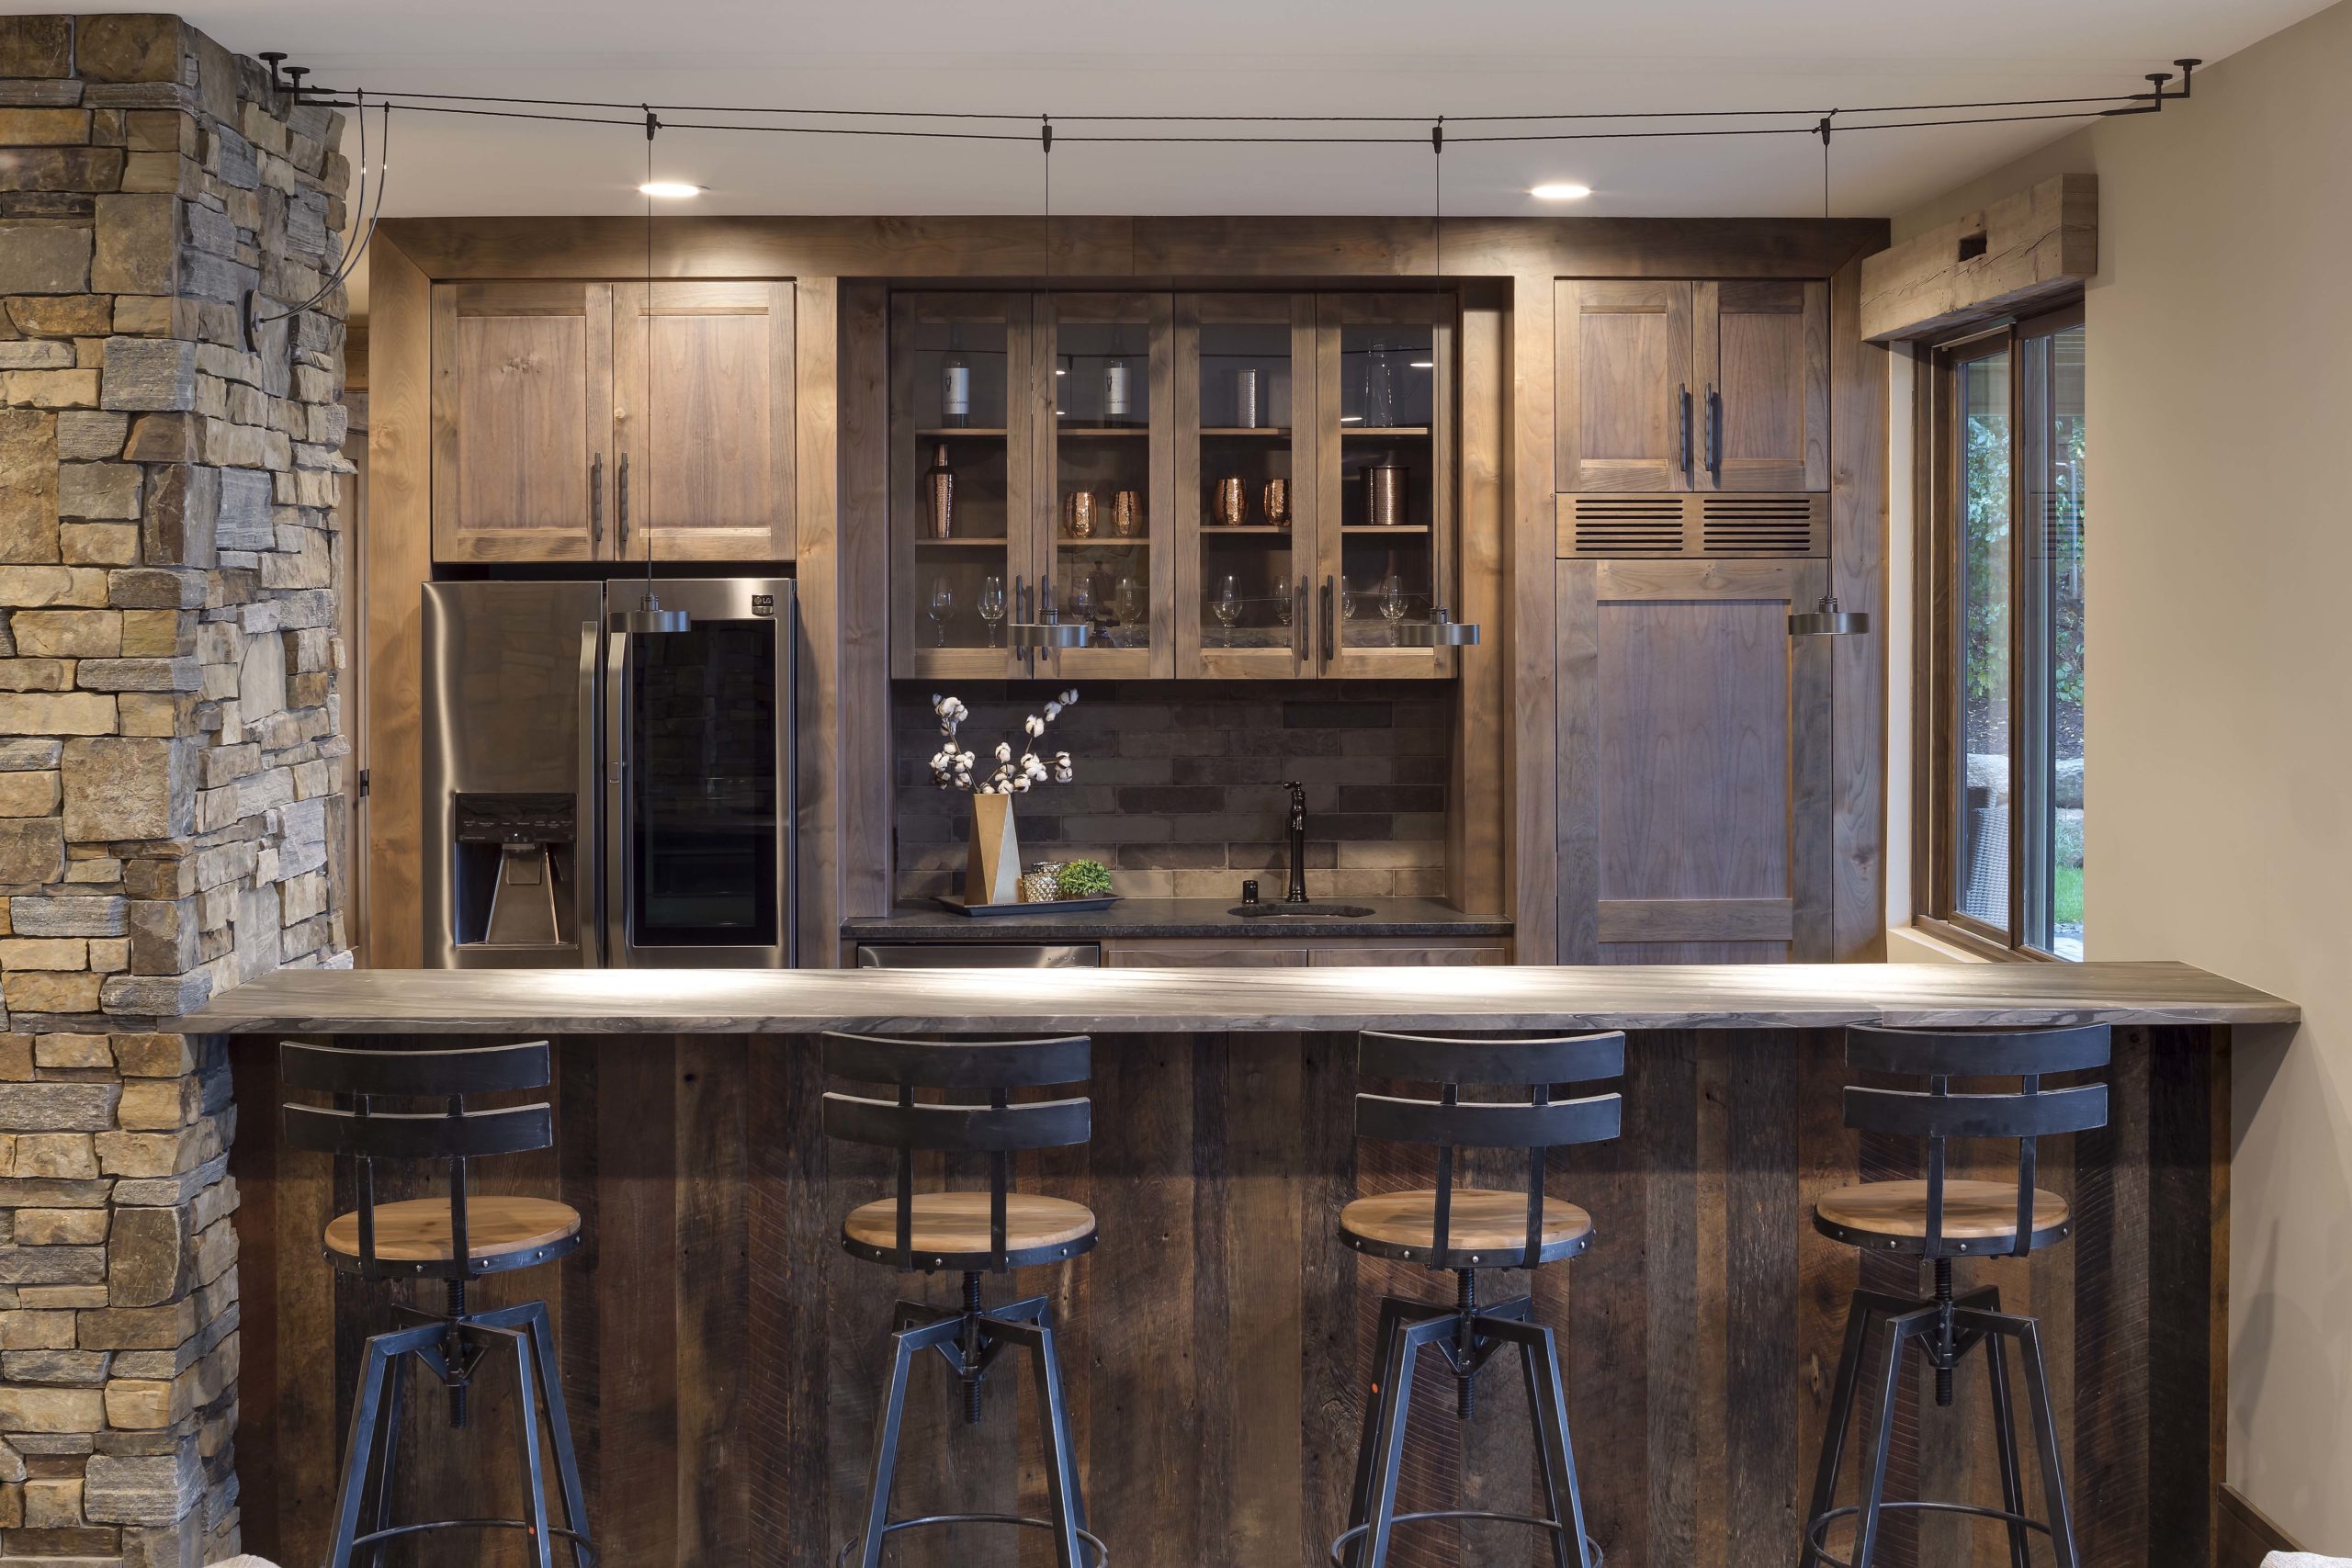 A rustic kitchen with a bar and stools.